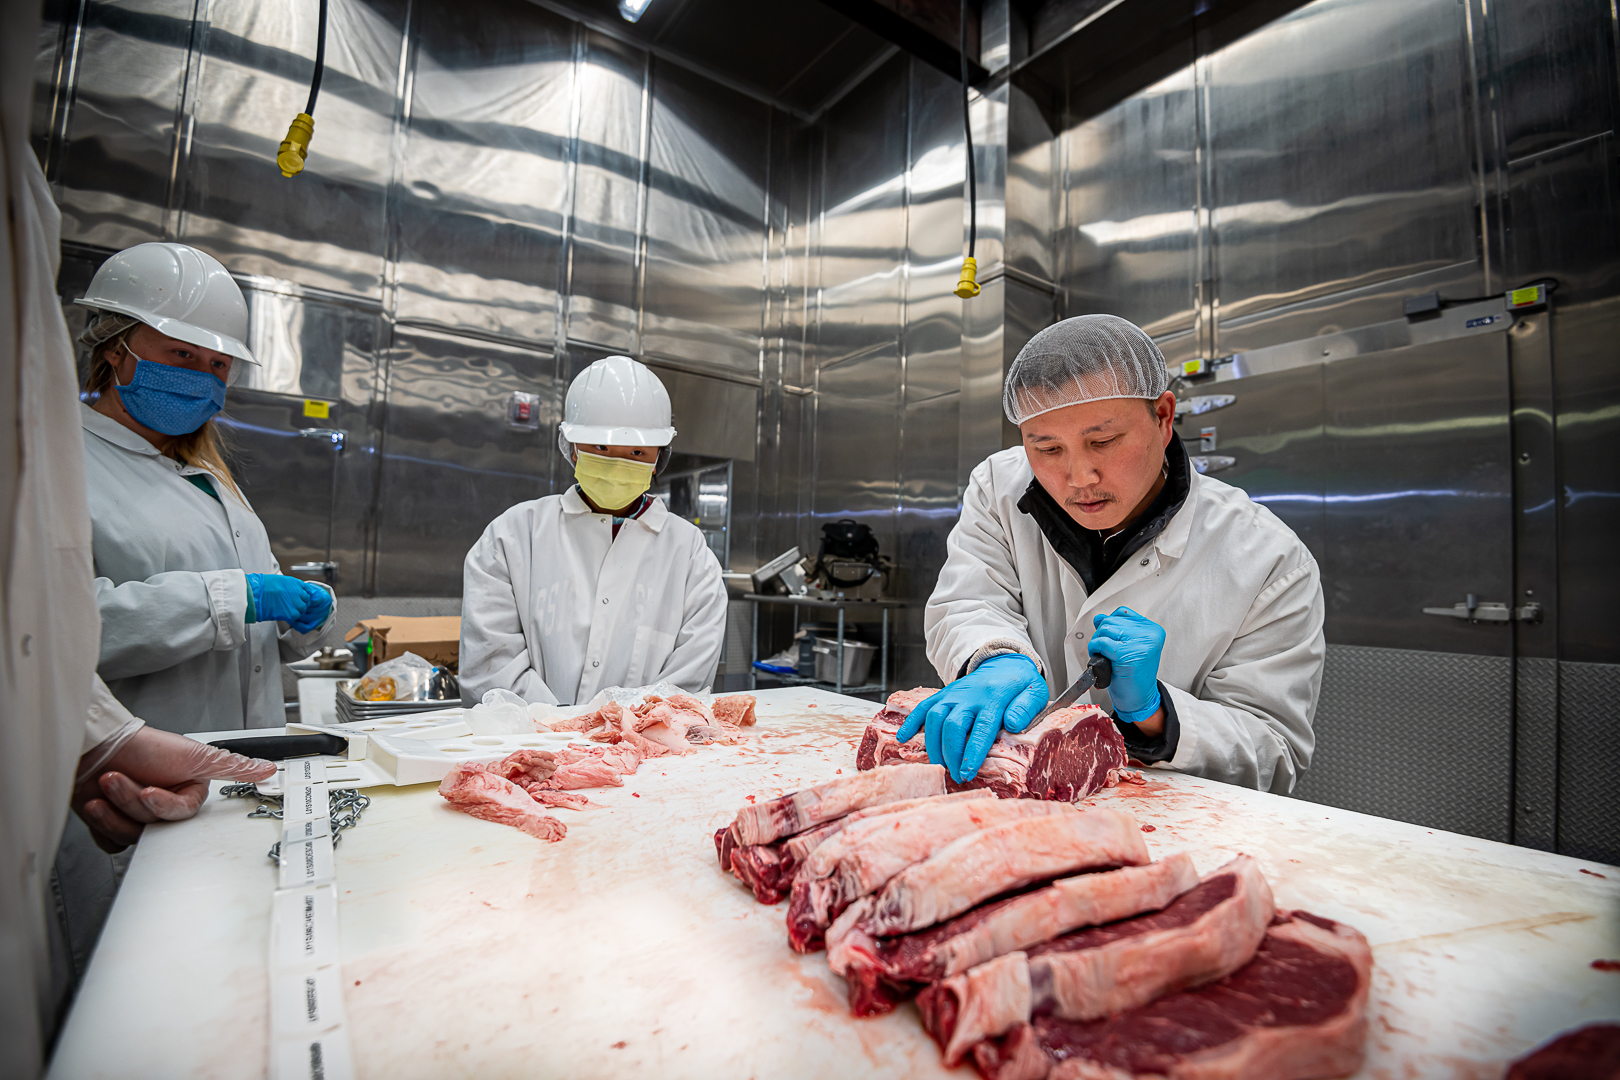 Dr. Thu Dinh, right, shows students how to cut beef at the MAFES Meat Science and Muscle Biology Laboratory. (Photo by David Ammon)